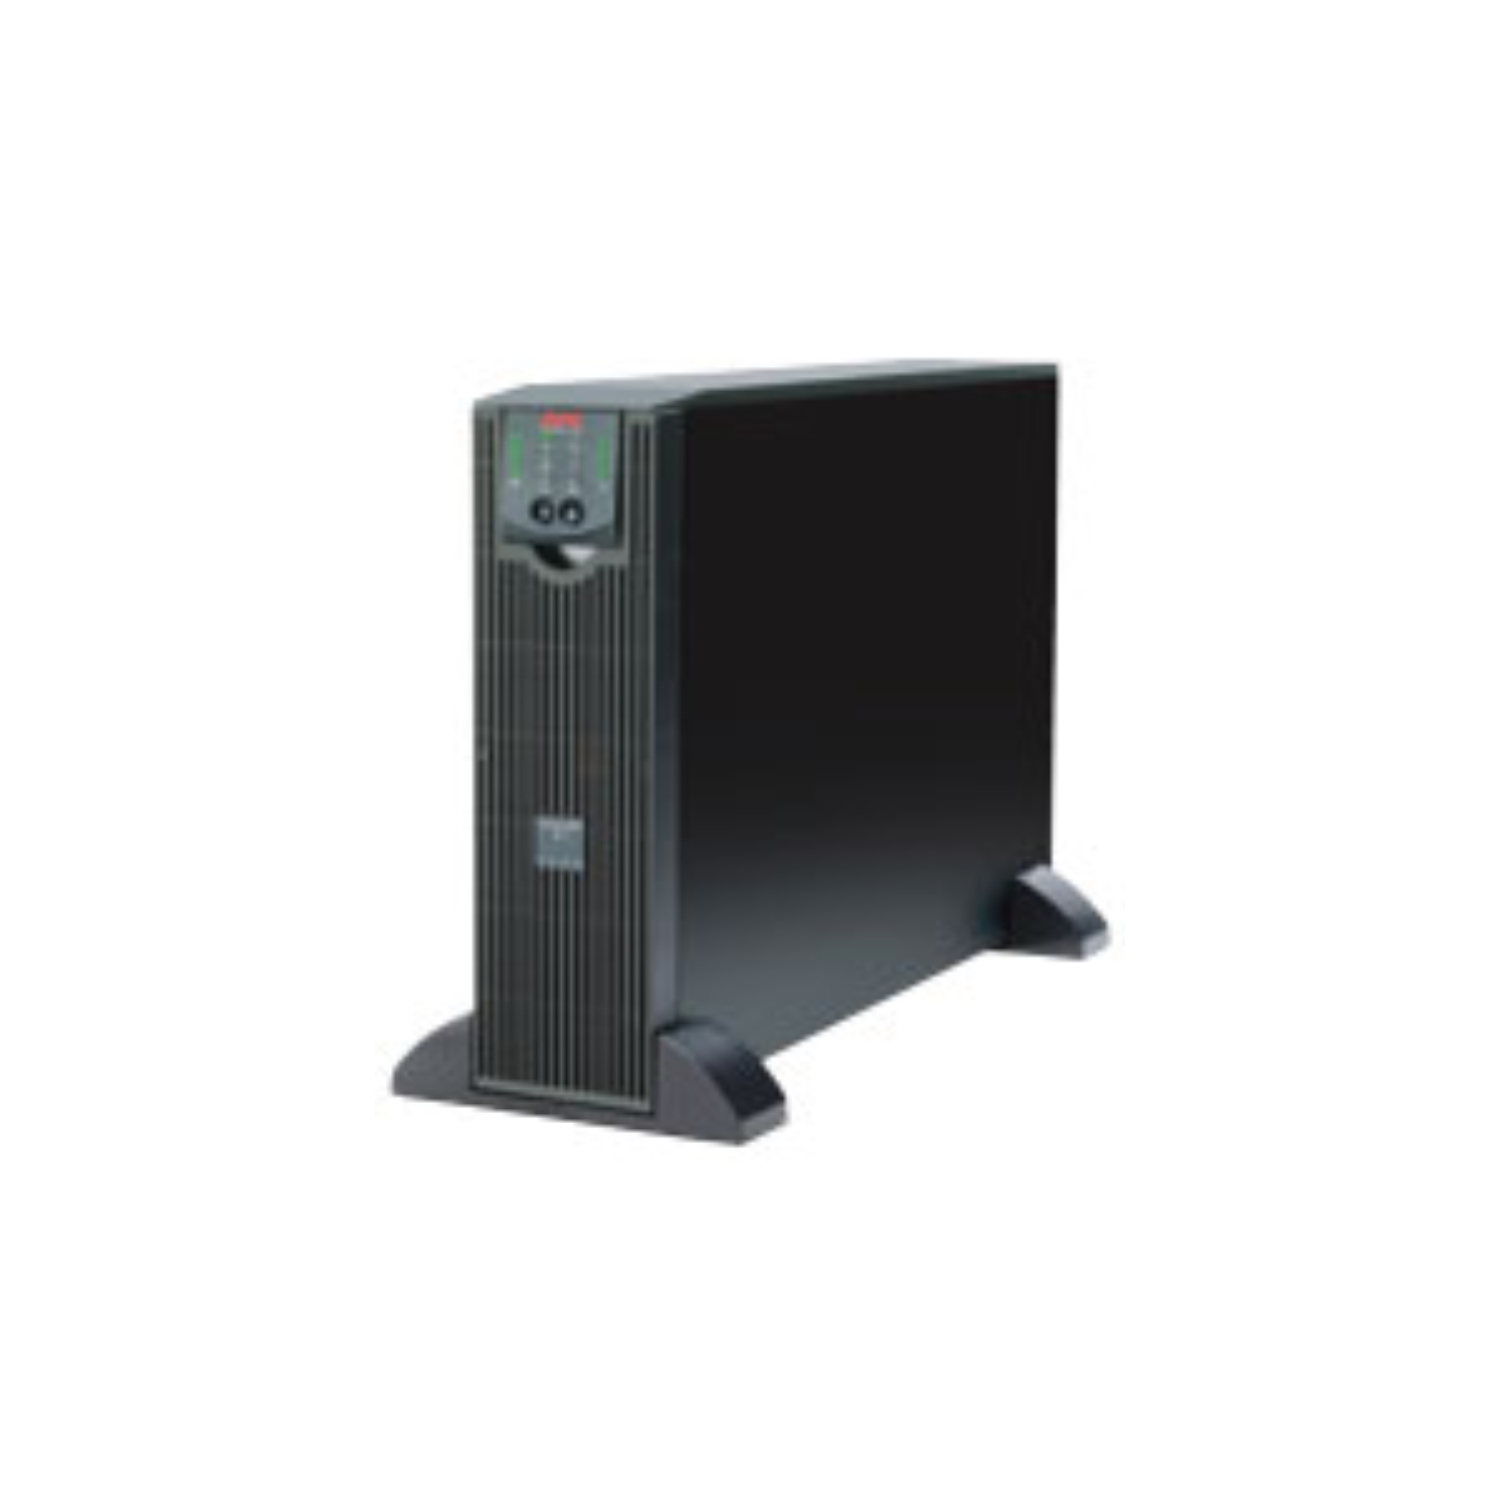 APC Smart-UPS RT 5000VA, 230V, 8x IEC 60320 C13 & 4x IEC Jumpers & 2x IEC 60320 C19 outlets, harsh environment